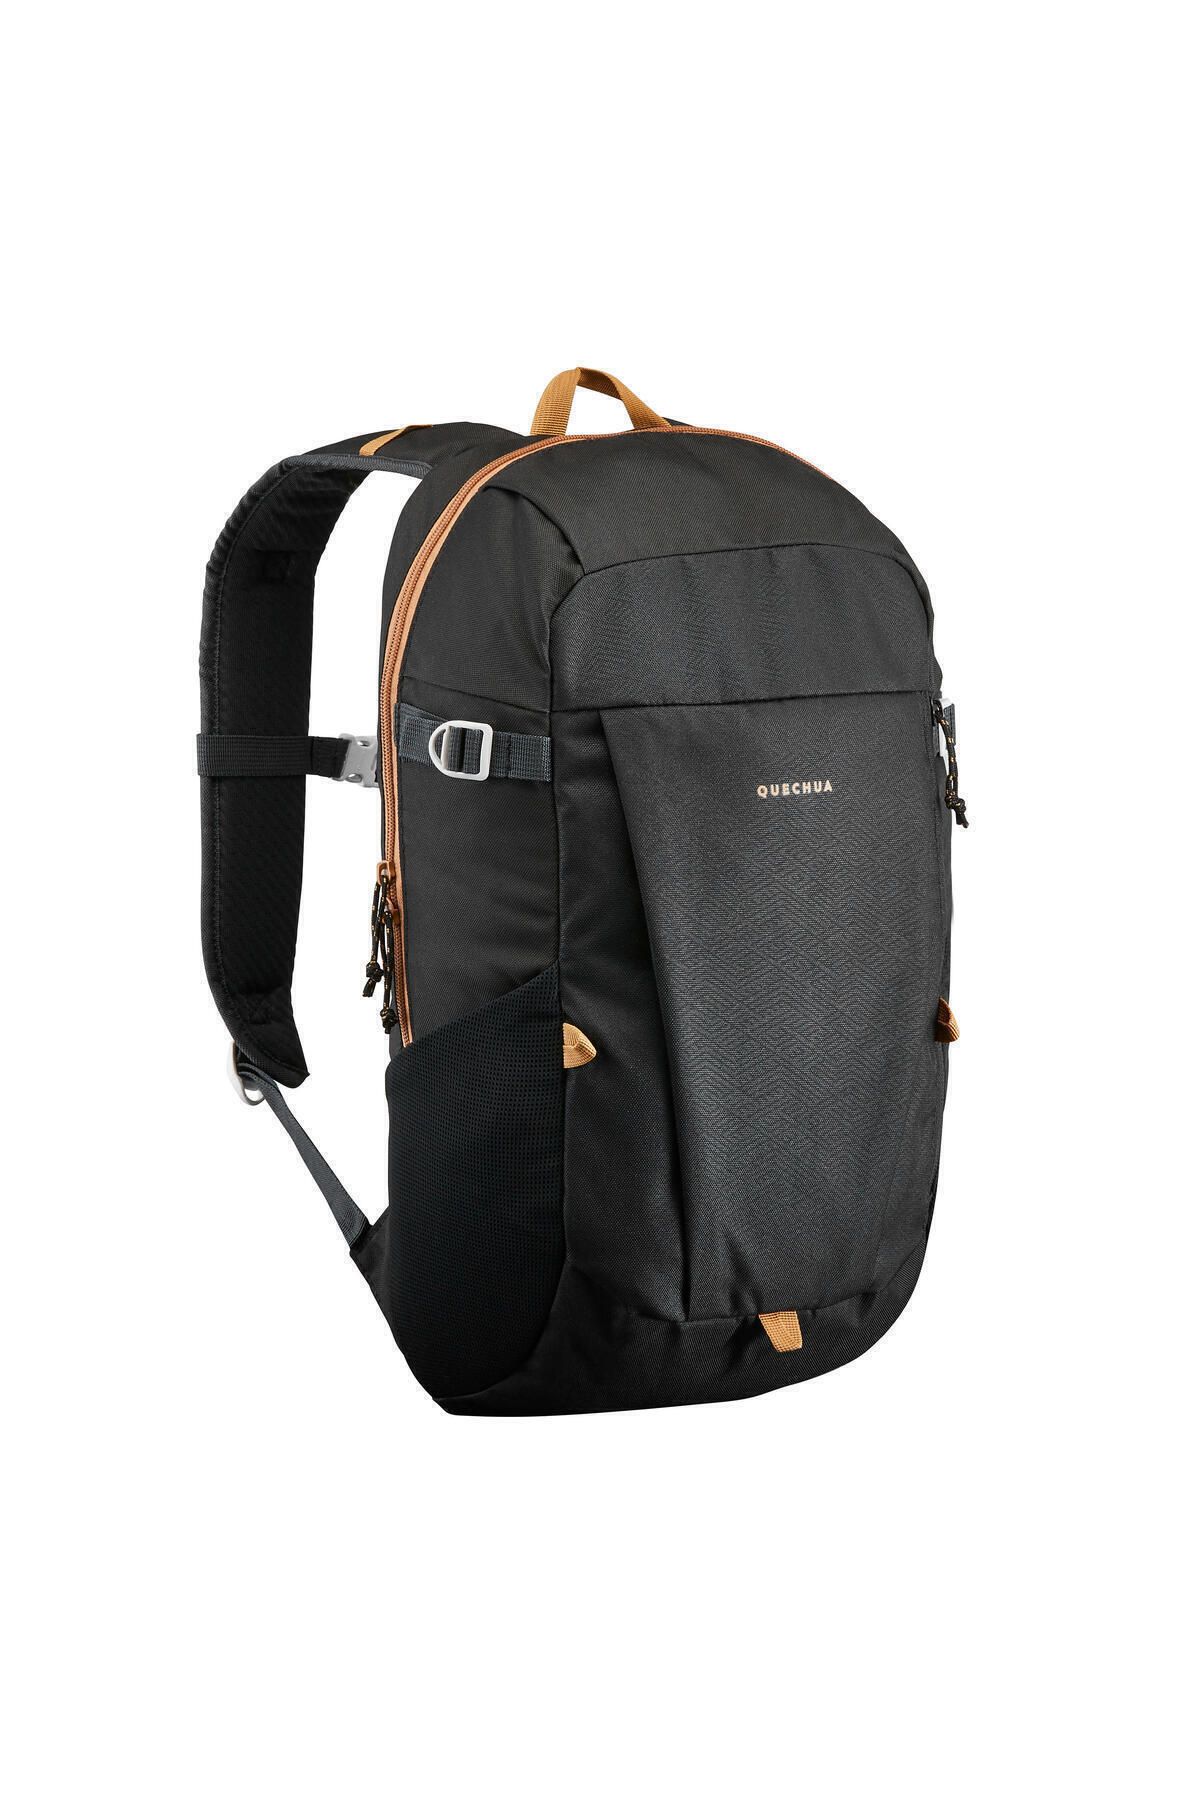 BAG PACK COMBO at Rs 849 | Computer Backpack in Belgaum | ID: 2851276097373